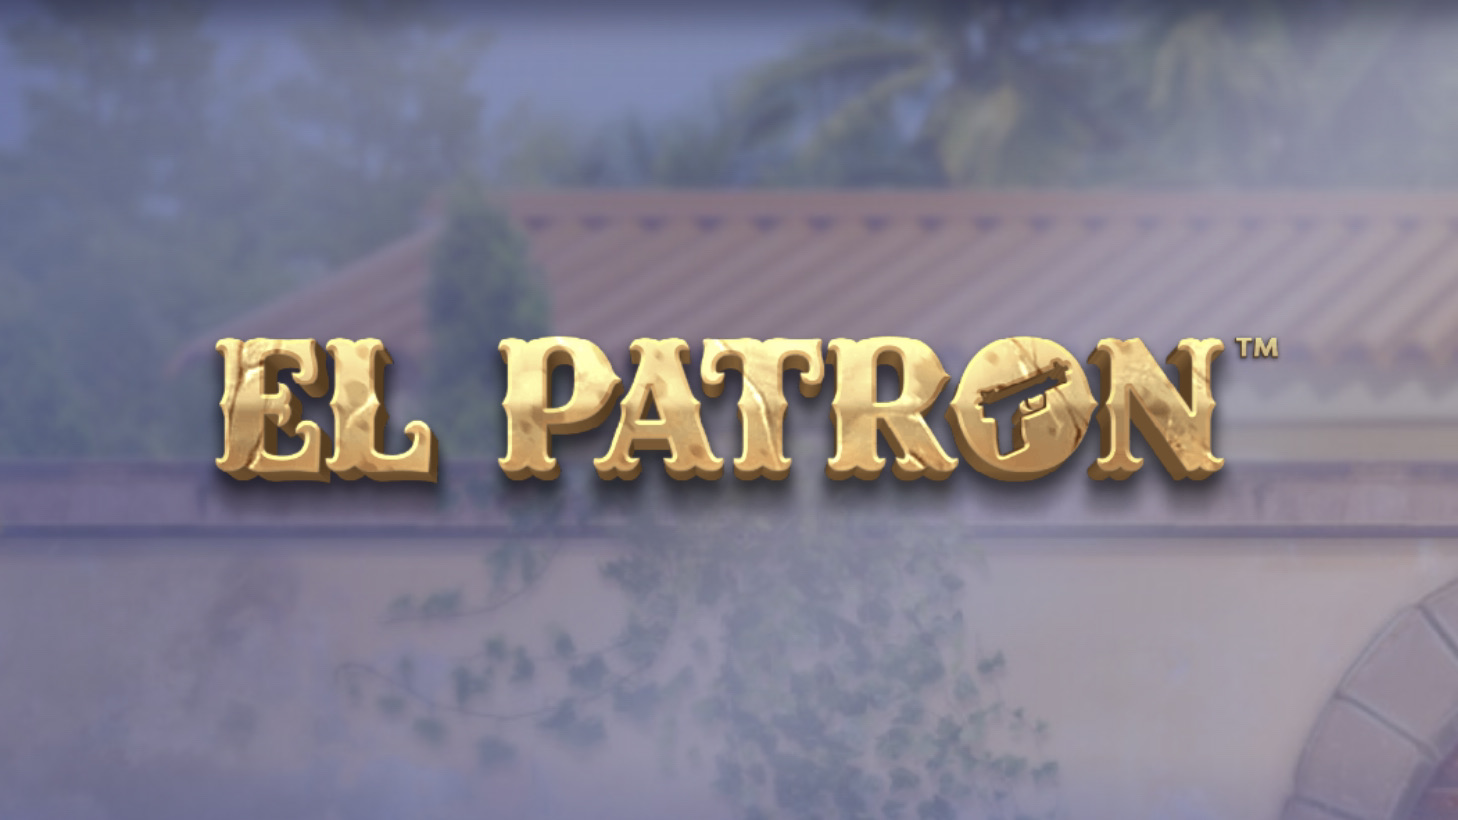 El Patron is a 3x3, 3,125-payline video slot that incorporates a maximum win potential of up to x25,000 the bet.